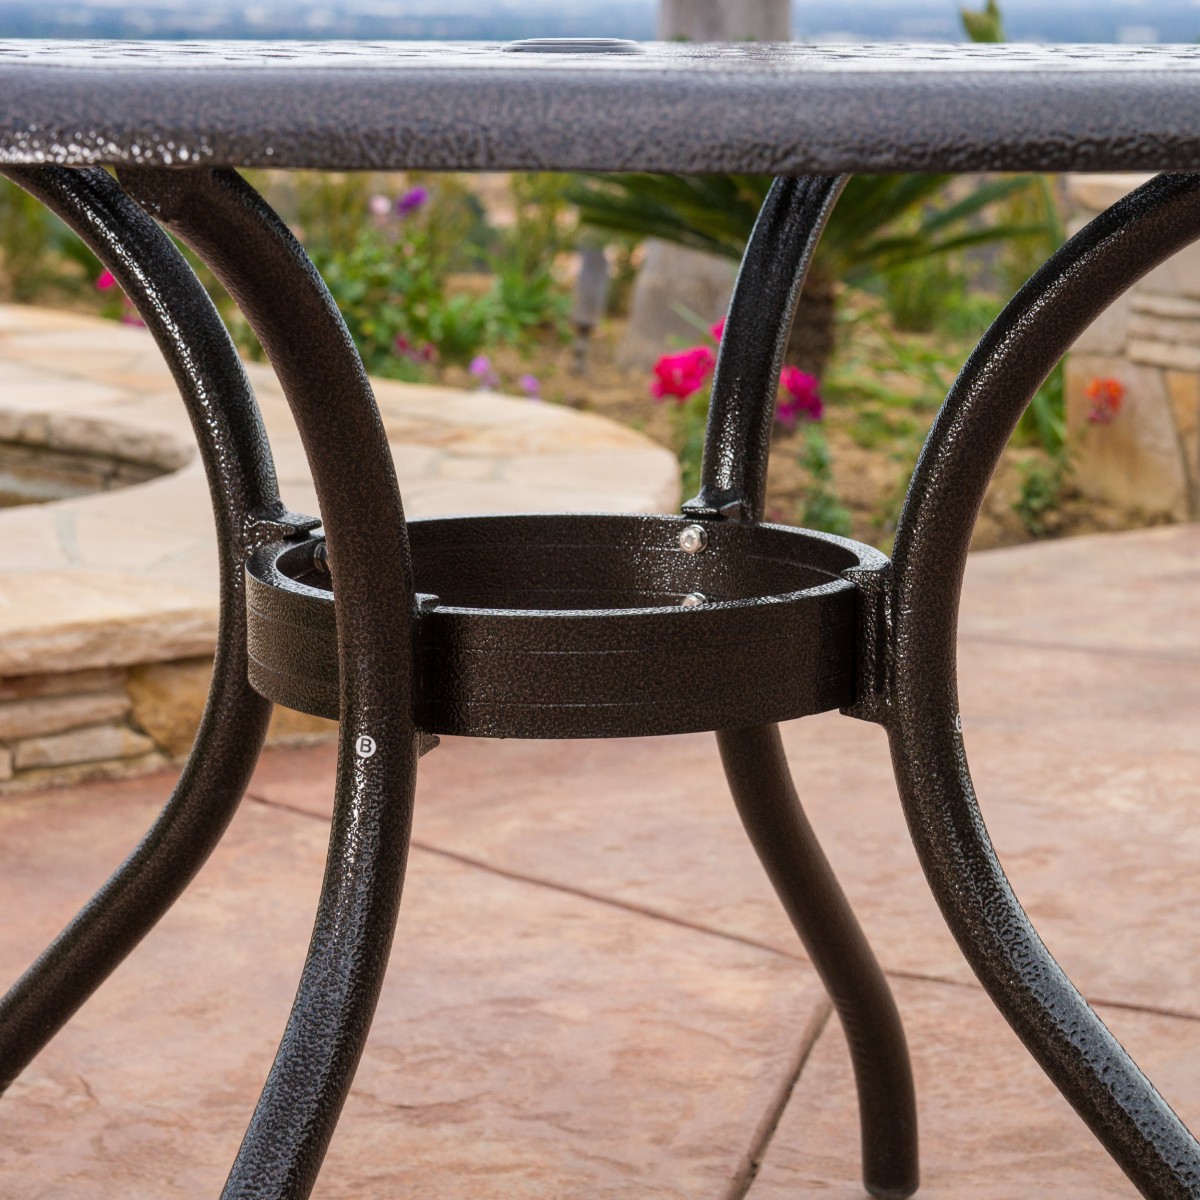 Covington Cast Aluminum 5 Piece Outdoor Dining Set with Round Table